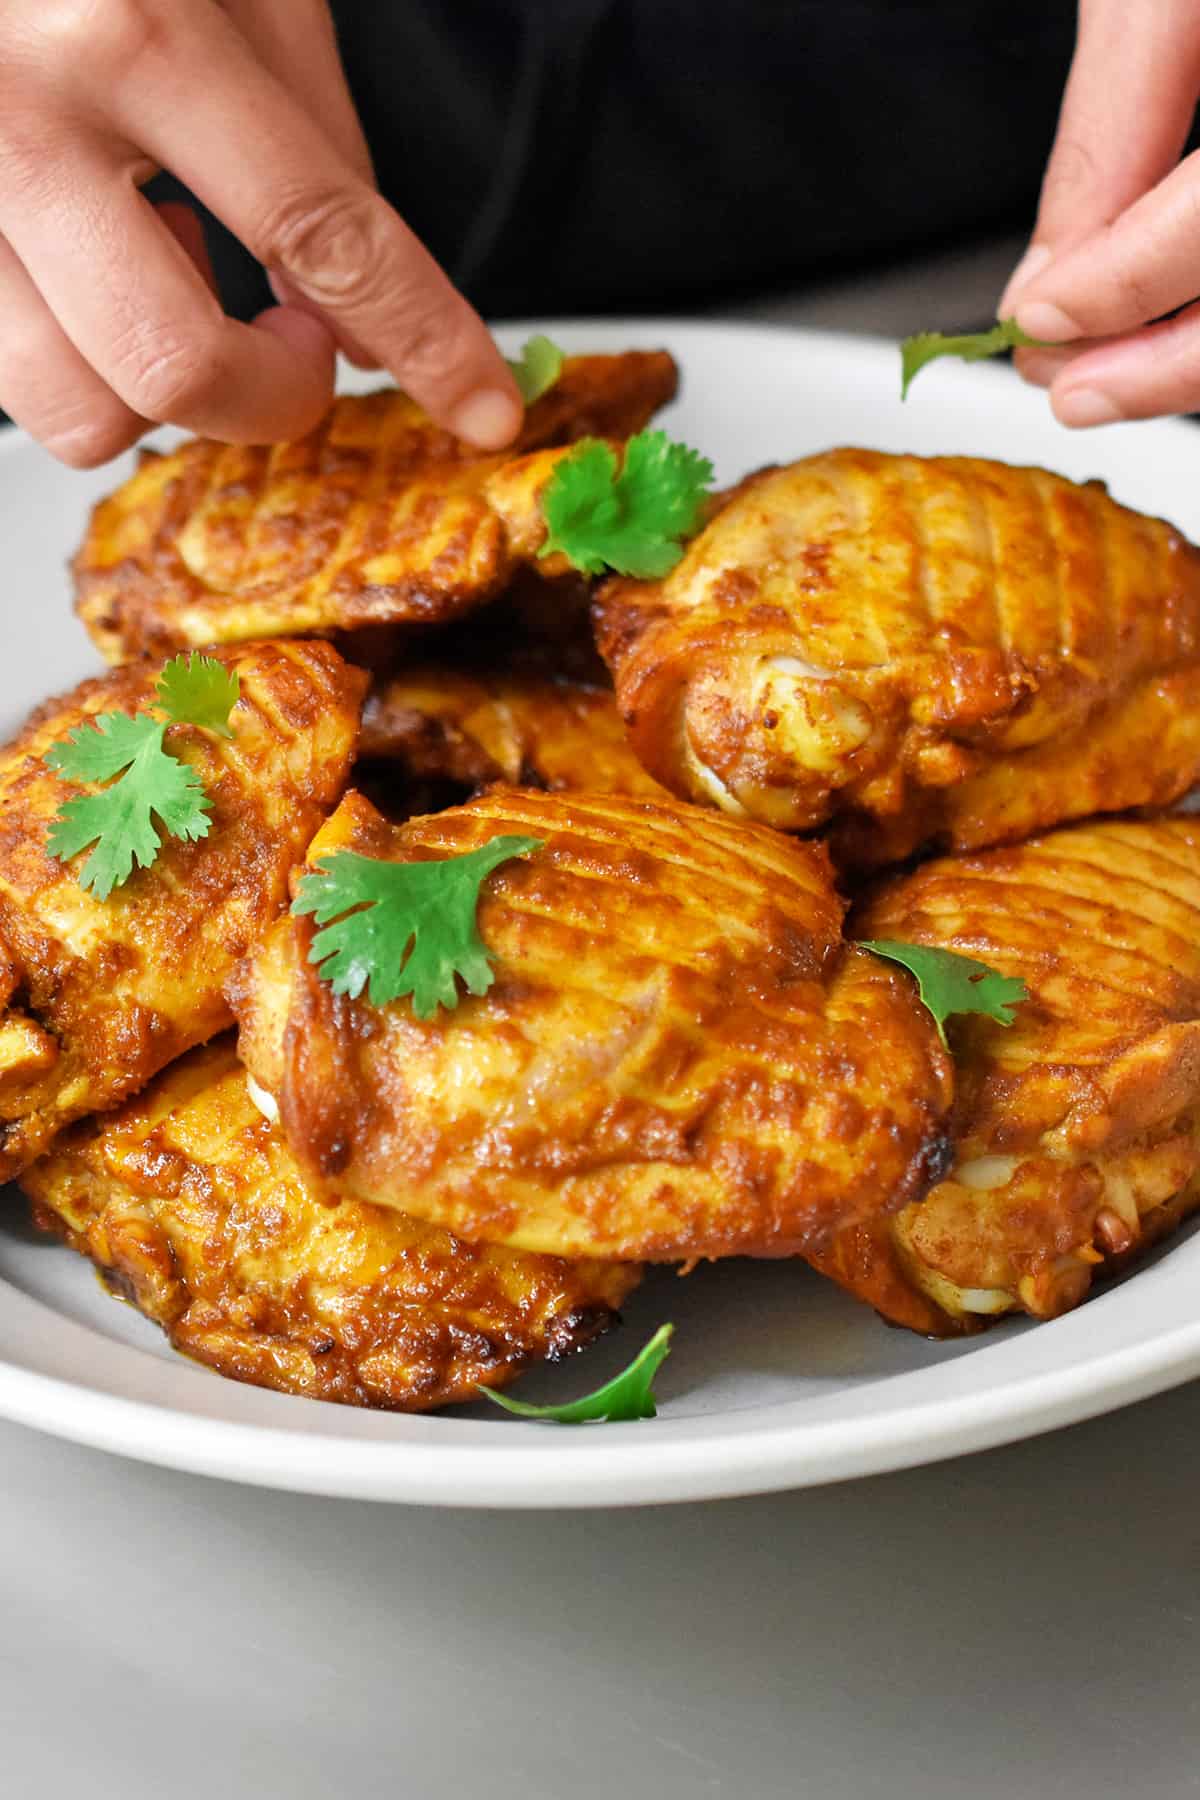 A hand is adding cilantro leaves to a platter of tandoori chicken.